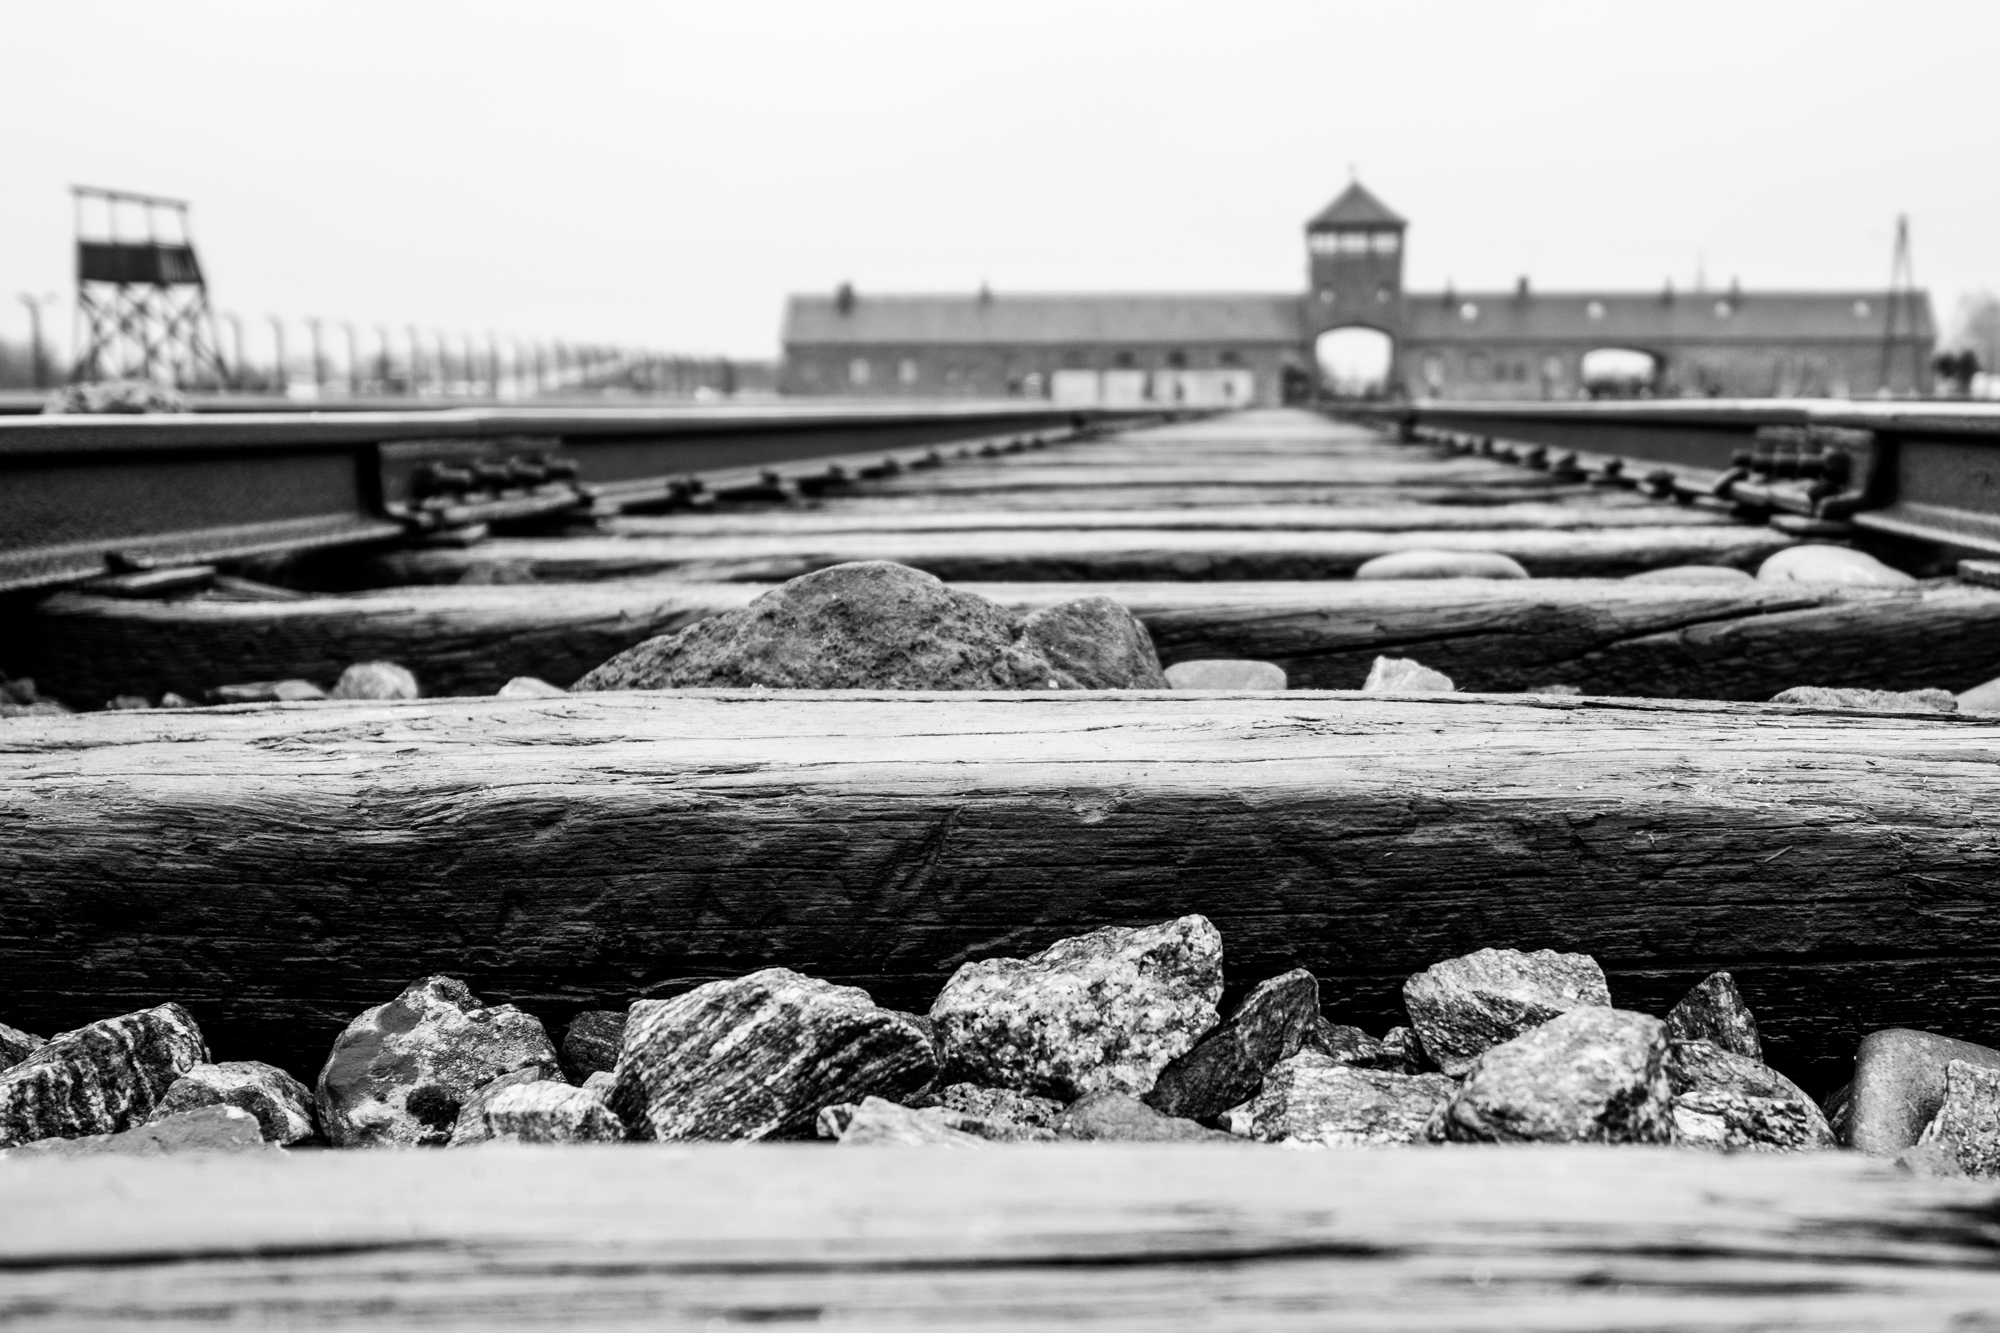 The infamous entrance to Auschwitz-Birkenau with the foreboding railway tracks